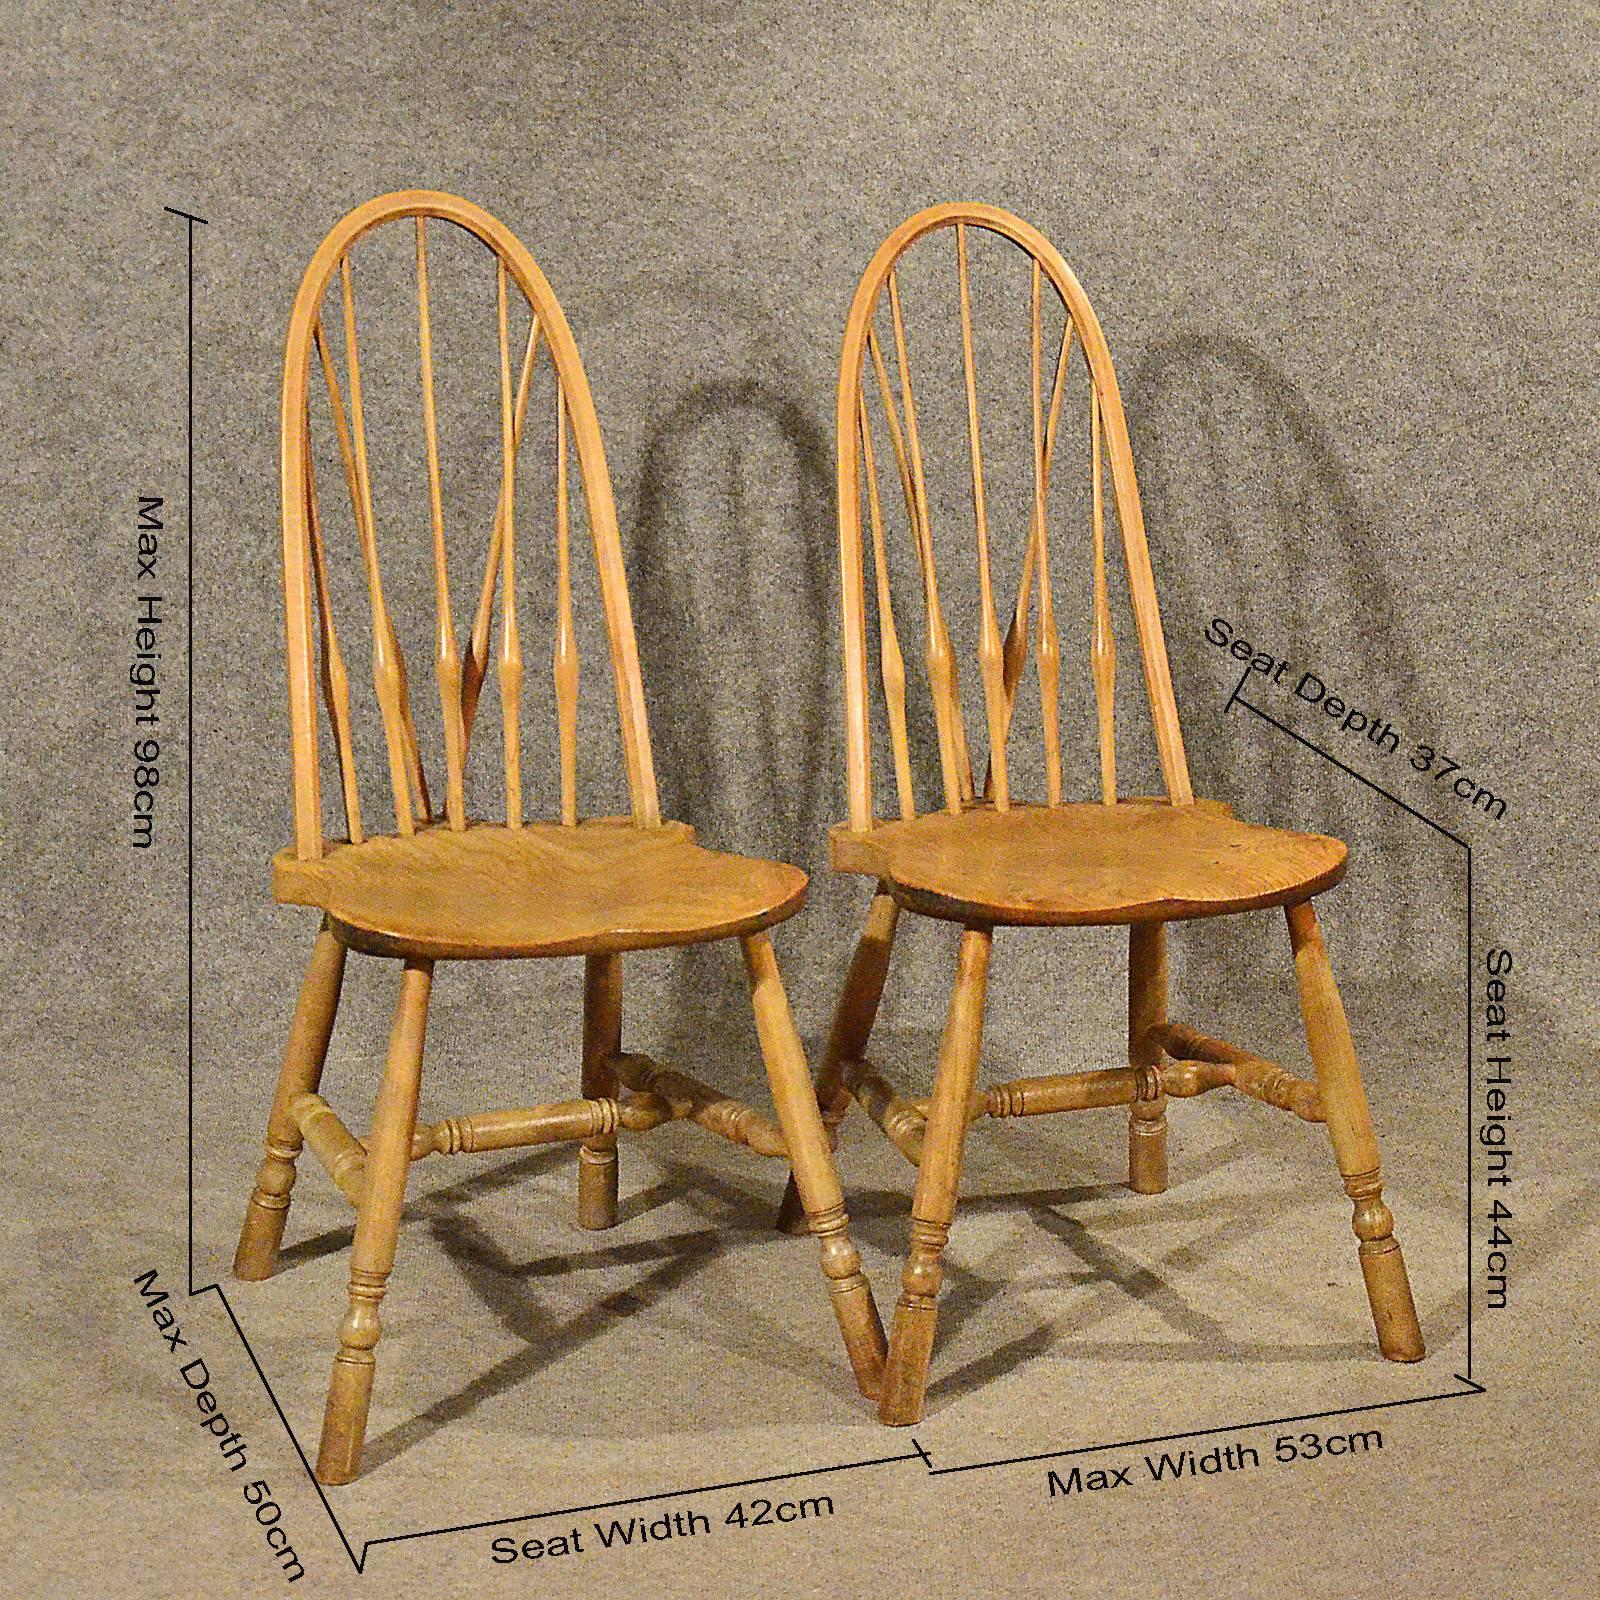 A superior pair of antique chairs presented in very good condition
Arts & Crafts styling
In elm with pleasing color and grain
Desirable seat form offering comfortable seating
Rising from turned legs united by a turned H-stretcher for